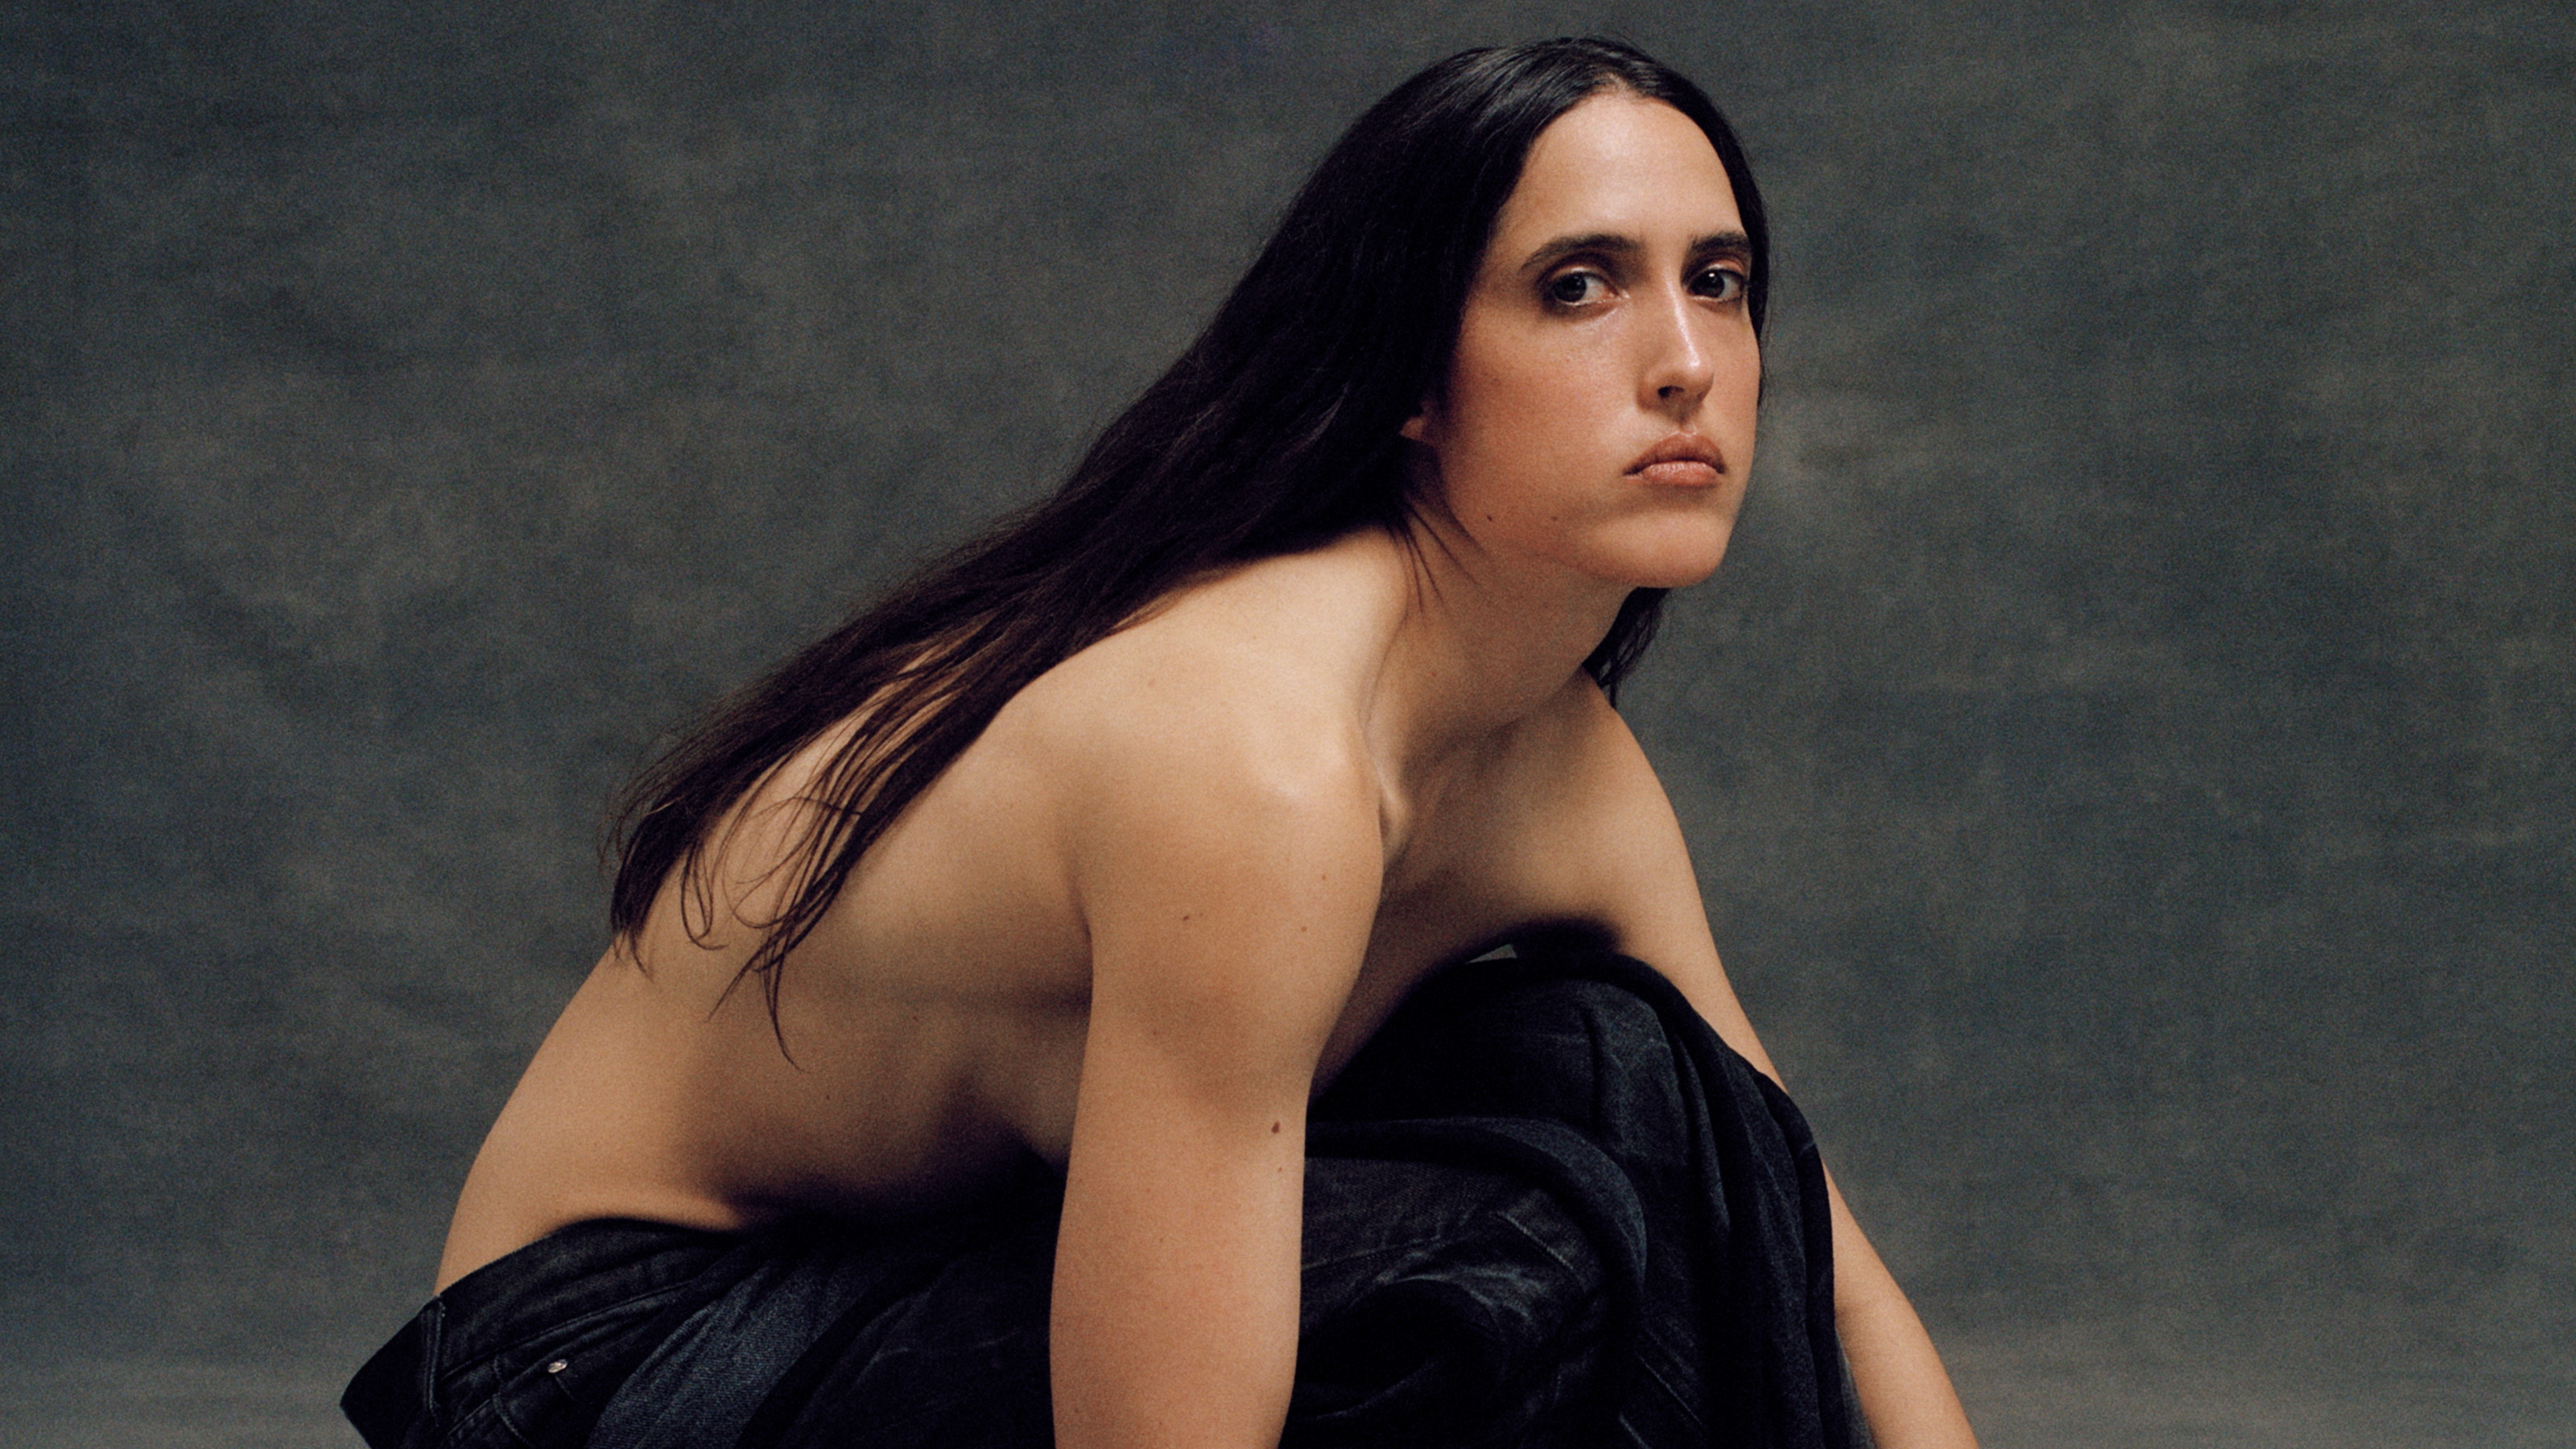 C.002 Helena Hauff: The Rules Don't Apply